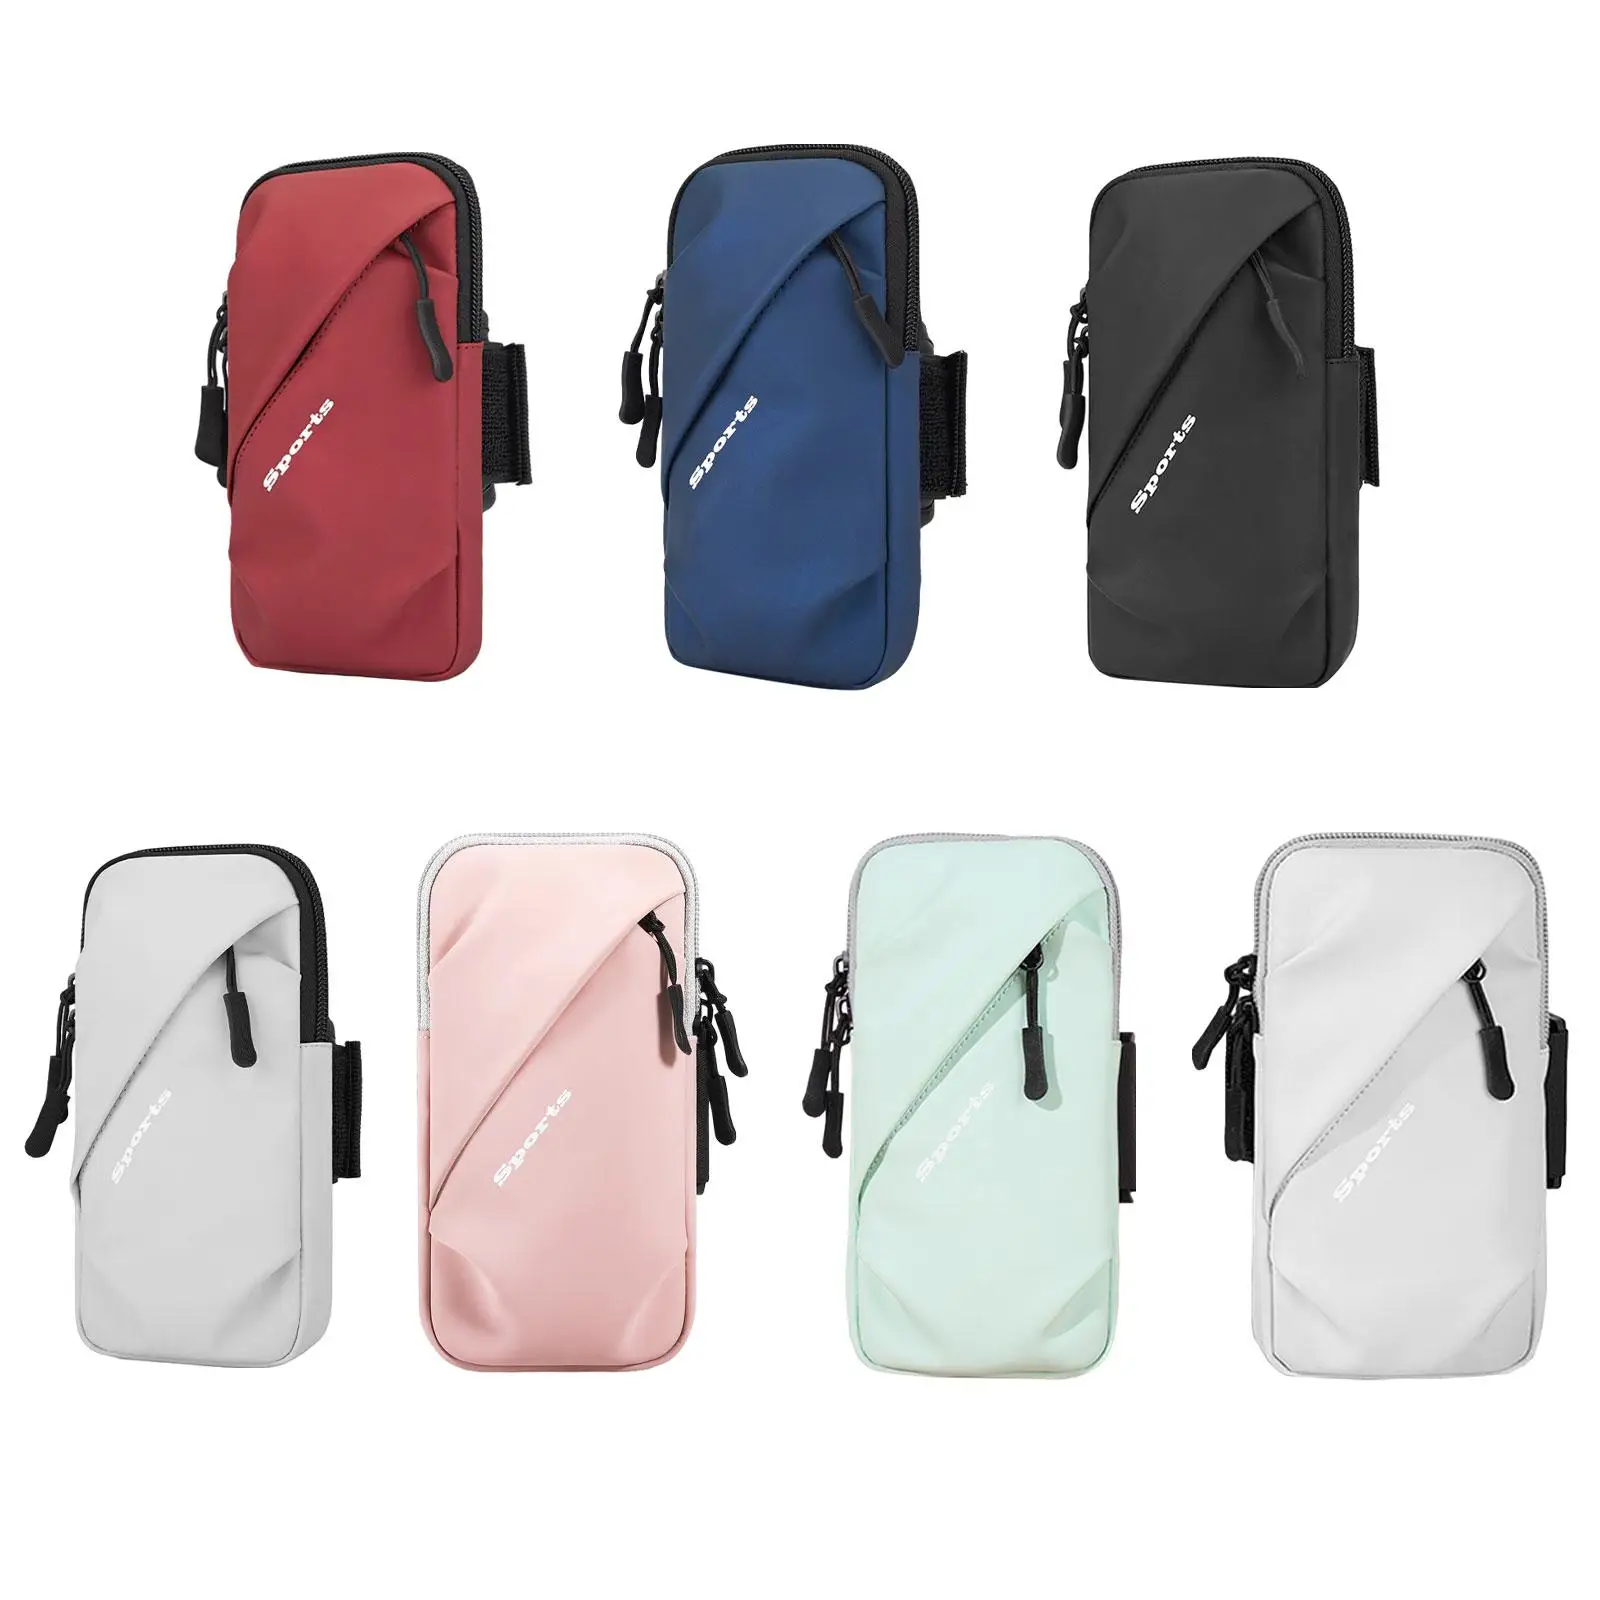 Phone Arm Band Bag Women Men Cellphone Holder Phone Holder Pouch Case Gym Armbands Bag for Exercise Hiking Travel Workout